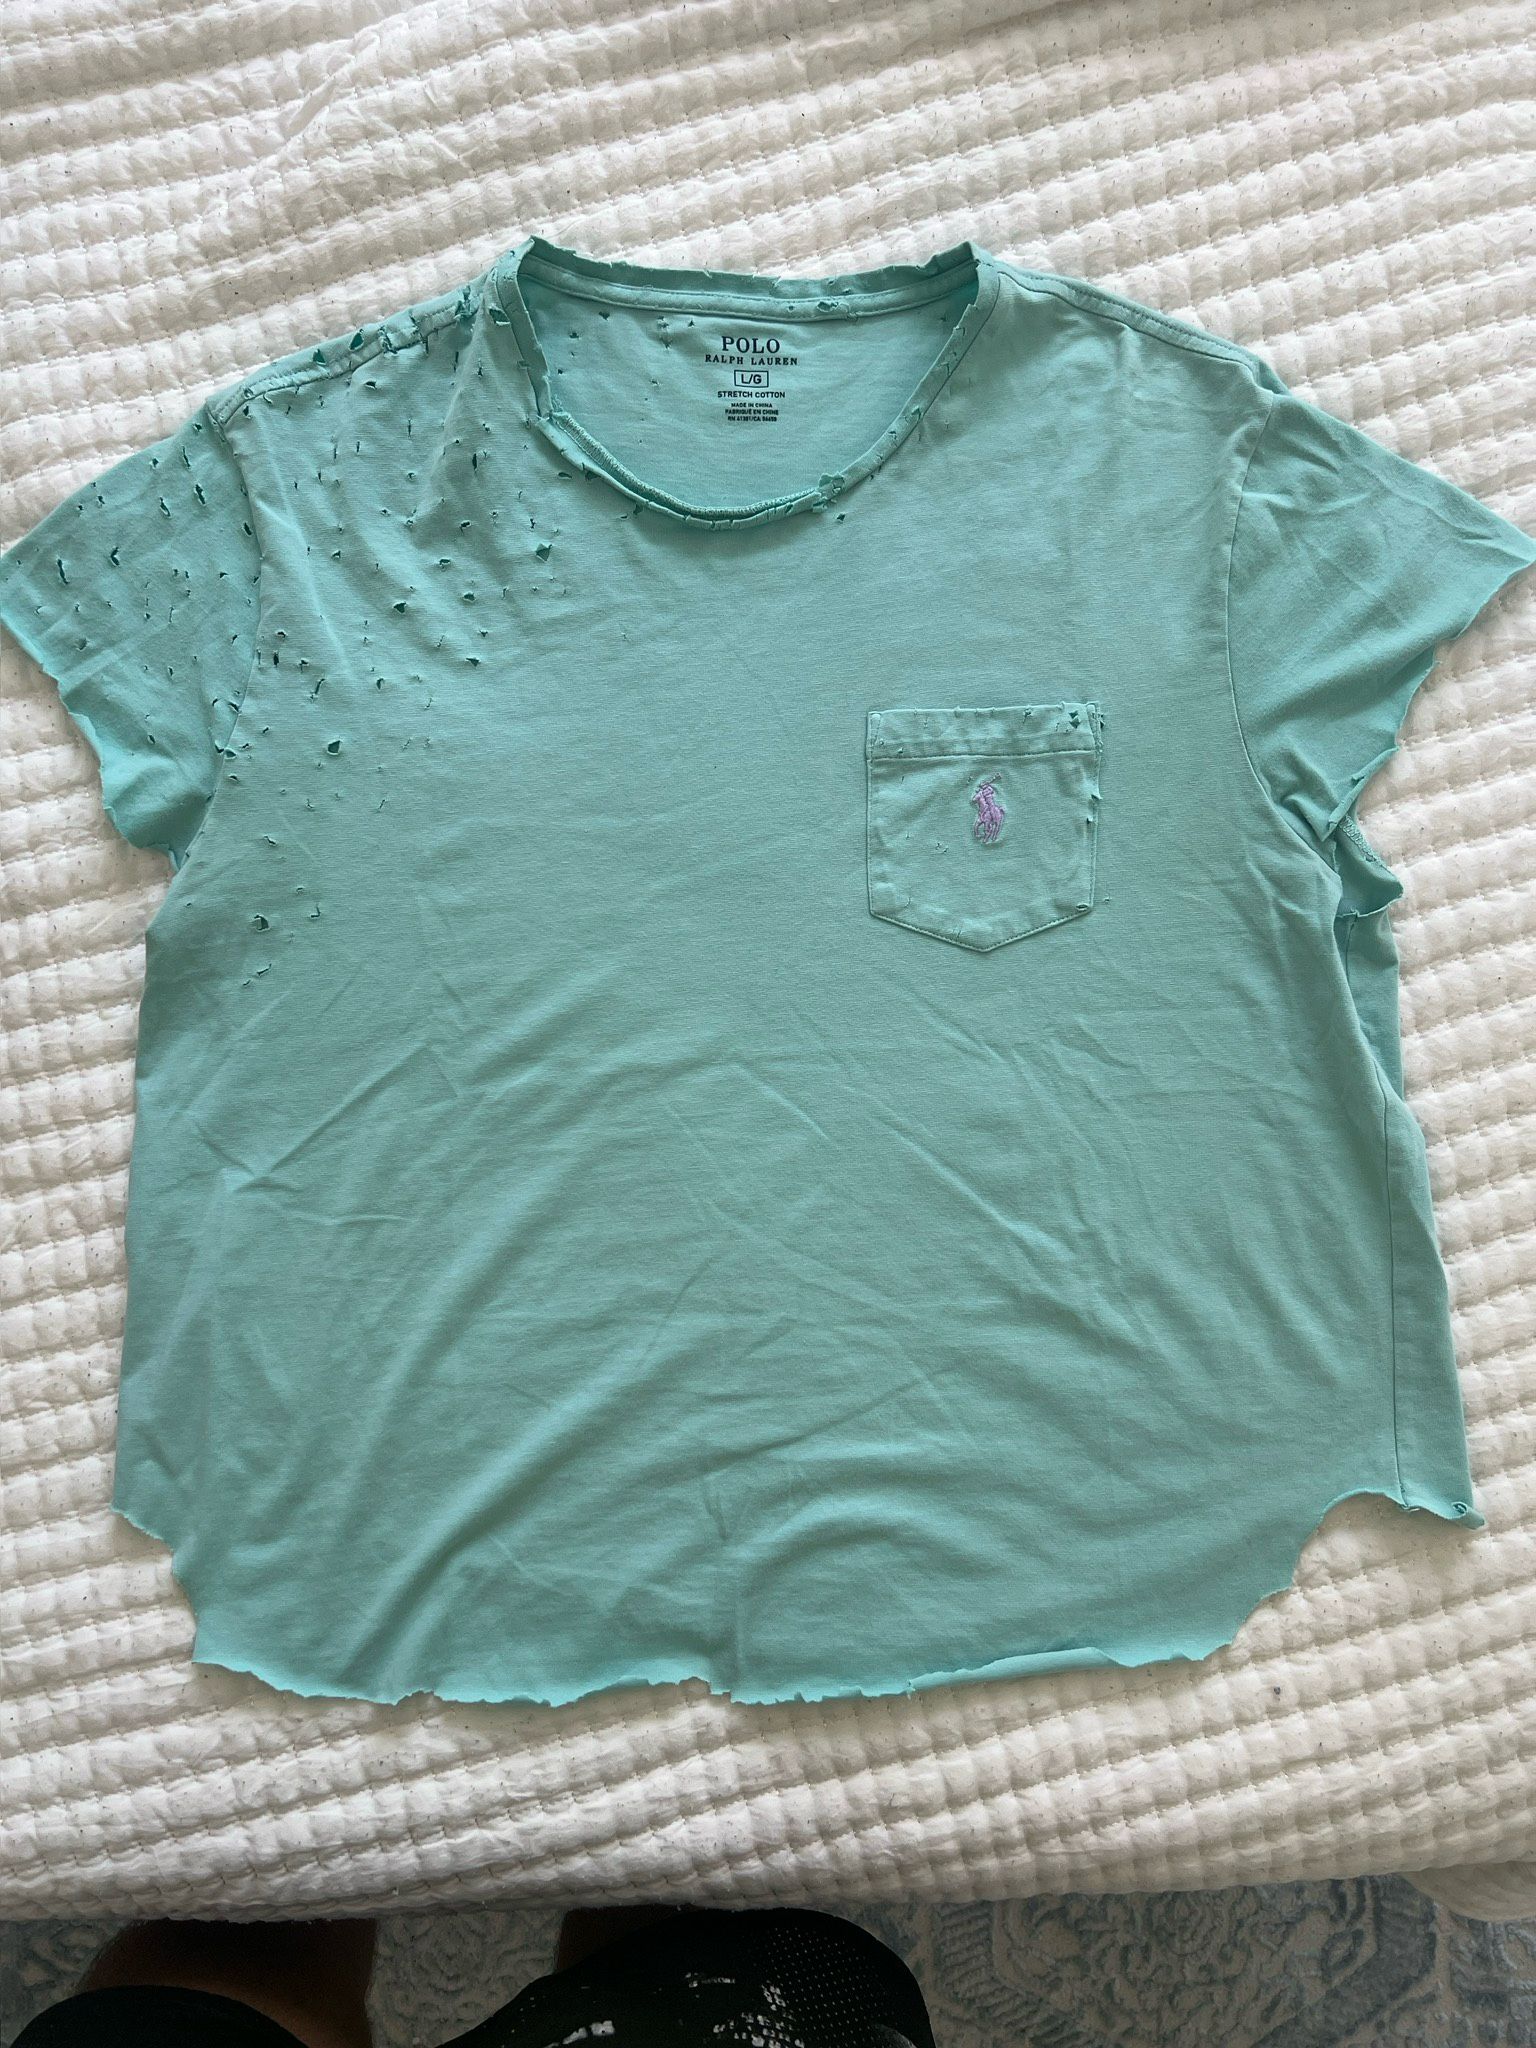 Chopped and screwed cropped polo, Ralph Lauren, muscle shirt, mint green size large